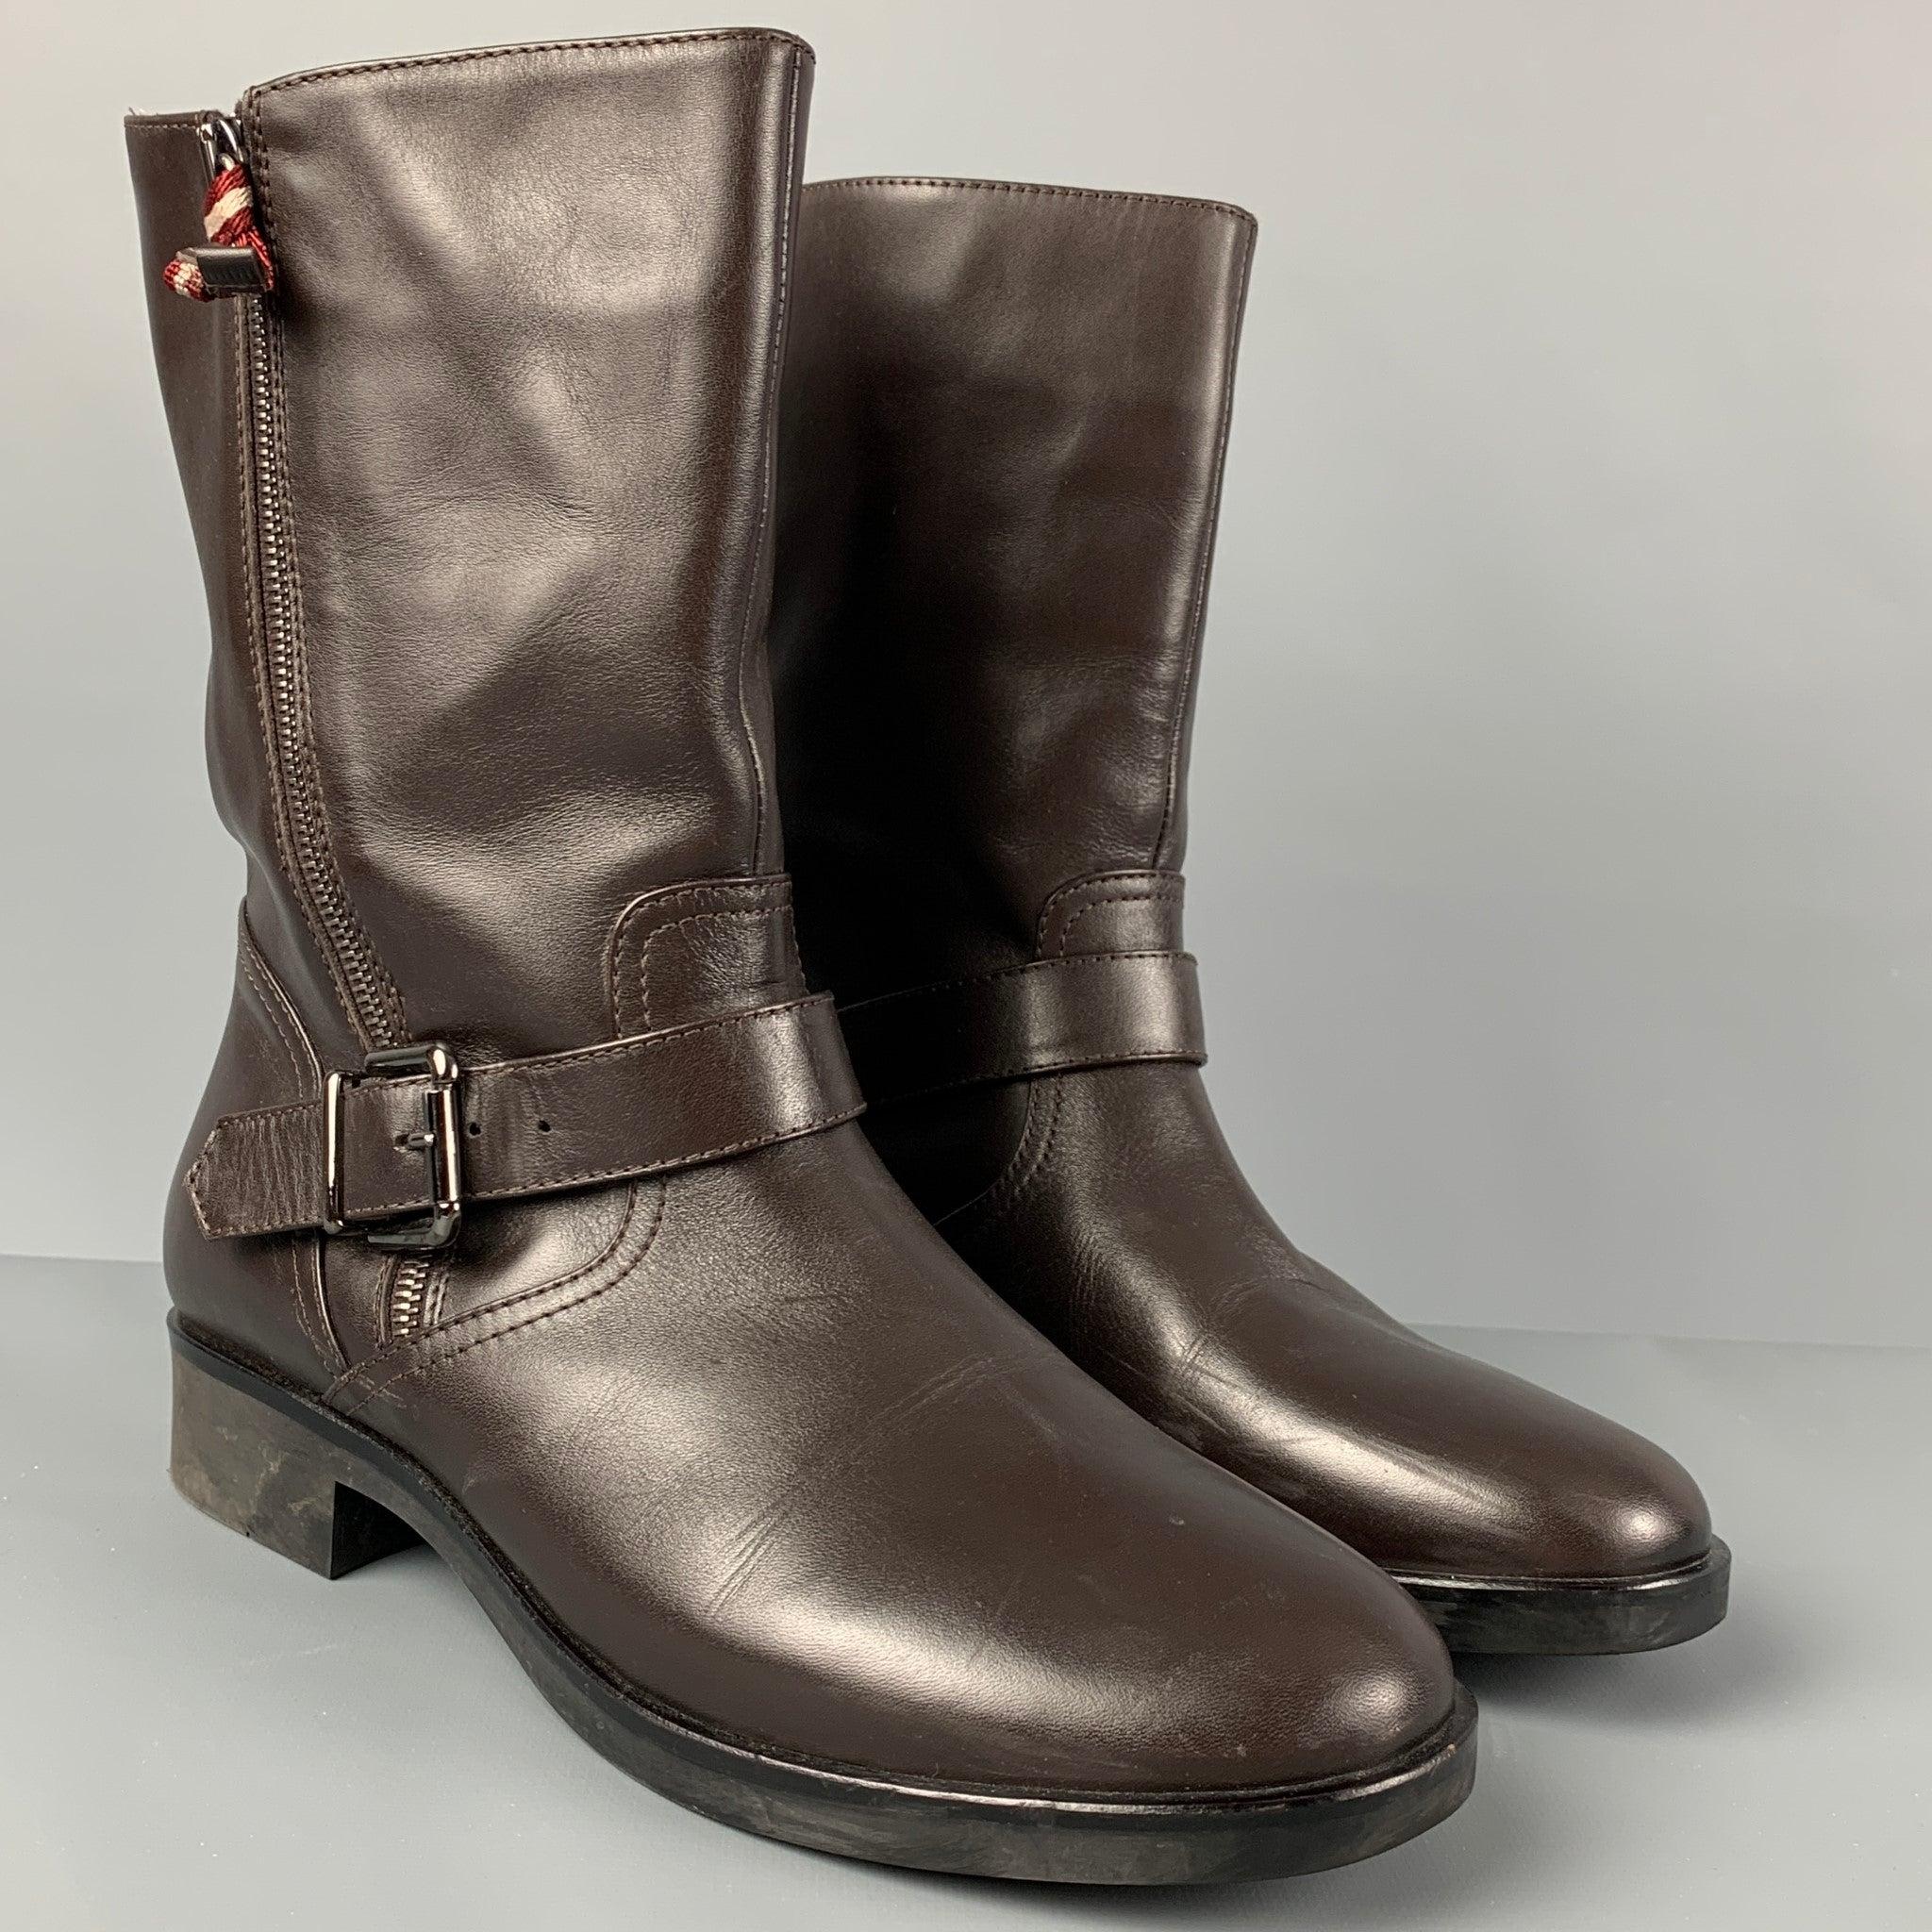 BALLY 'Desia' boots comes in a brown leather featuring a belted strap and a side zipper closure. Made in Italy.
Very Good
Pre-Owned Condition. 

Marked:   42 

Measurements: 
  Length: 11 inches  Width: 3.75 inches  Height: 9.75 inches 
  
  
